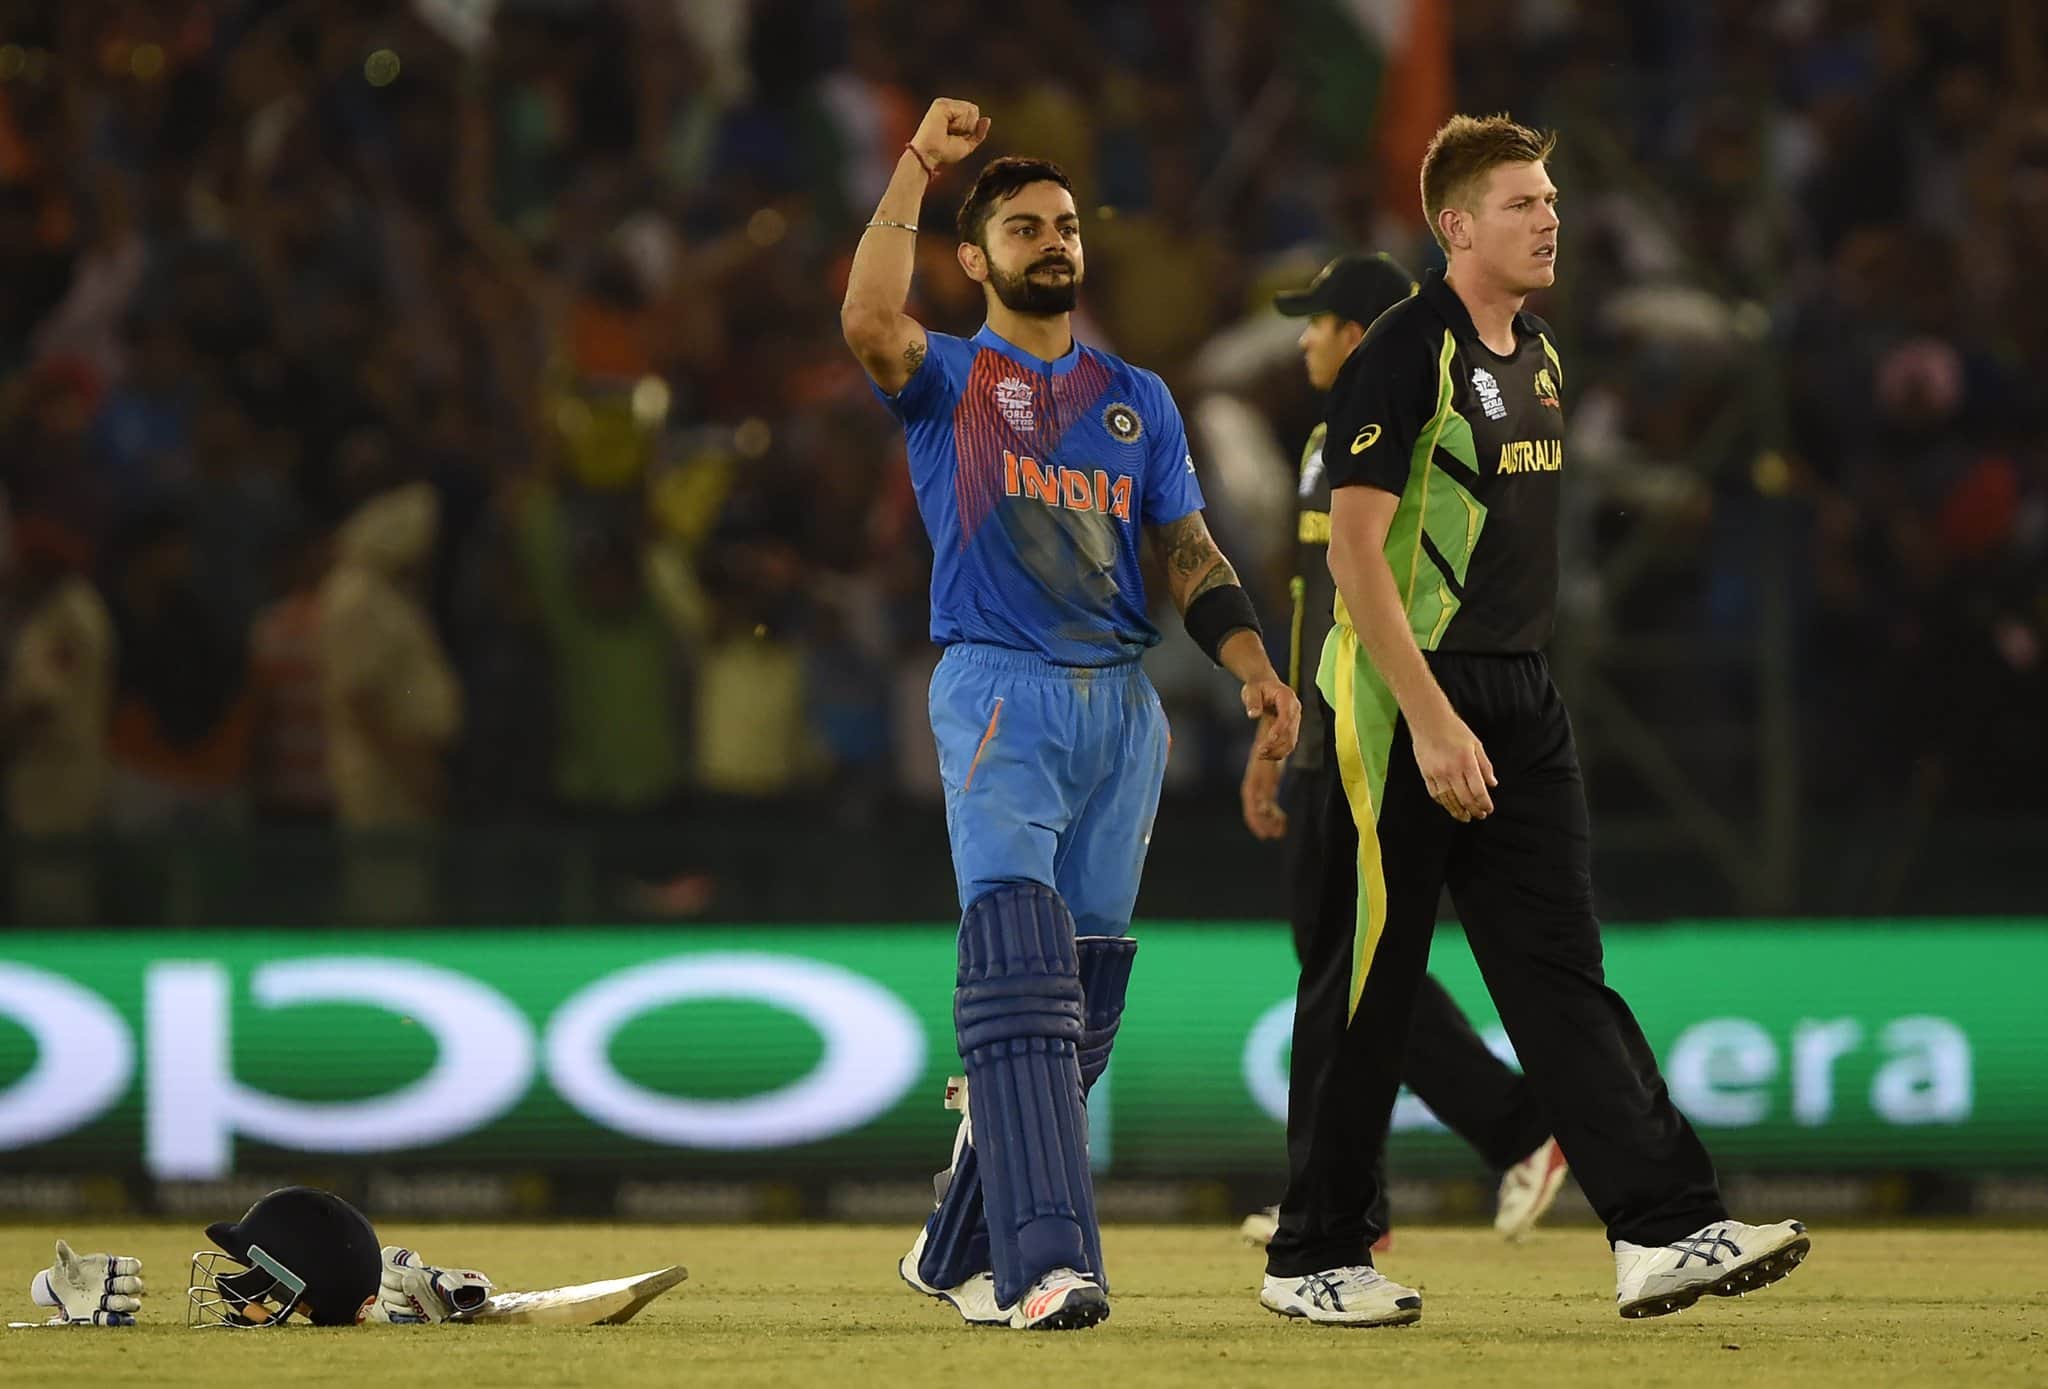 Kohli remained unbeaten at 82 vs Australia in the T20 WC 2016 [X]
